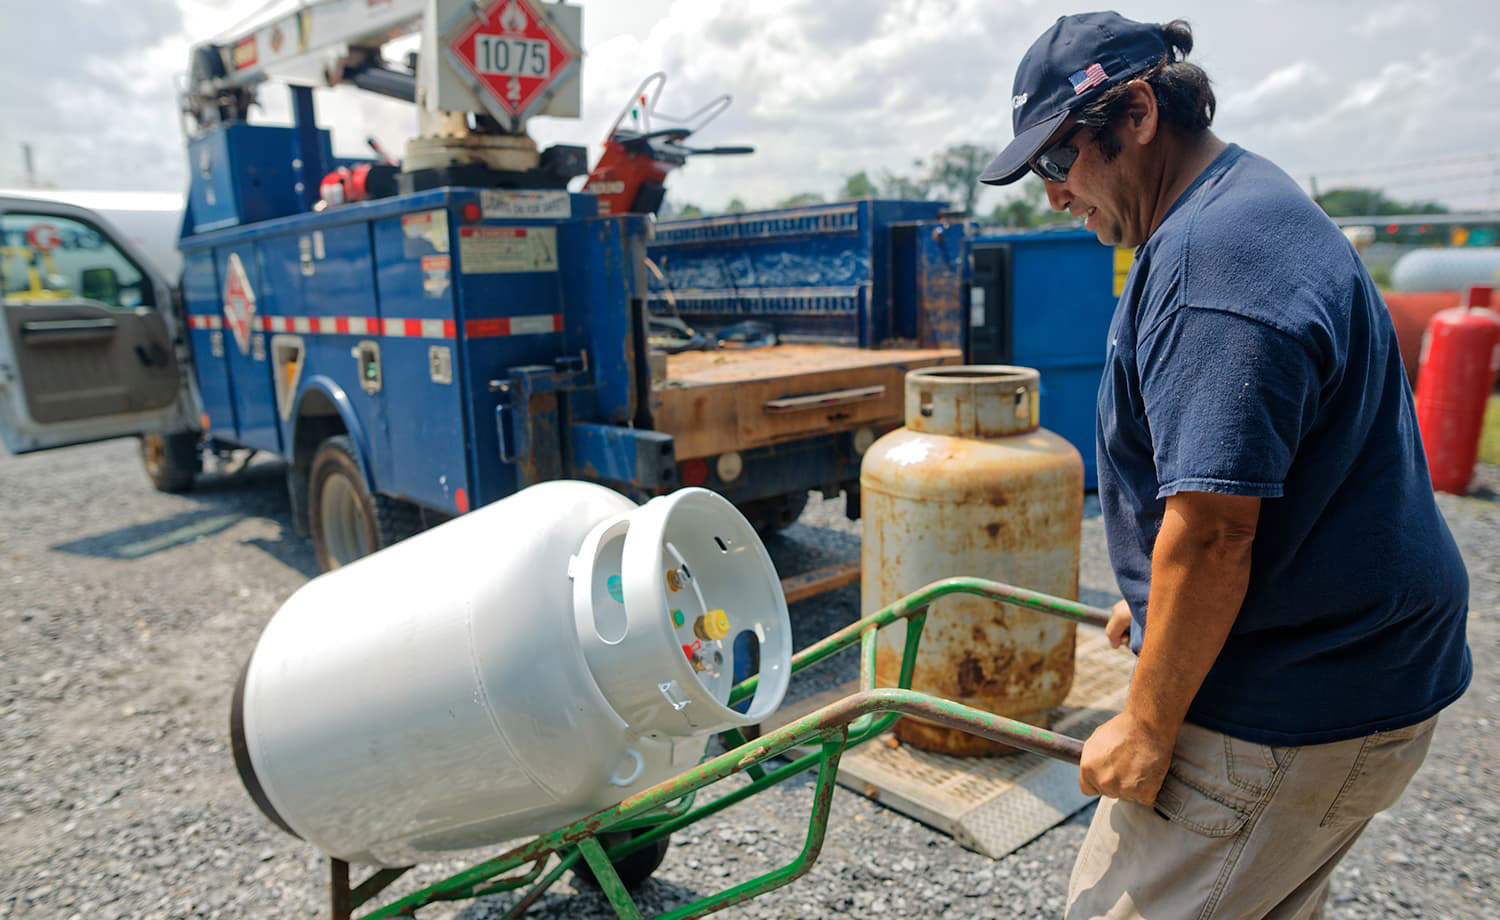 Man moving propane tank with a hand truck.